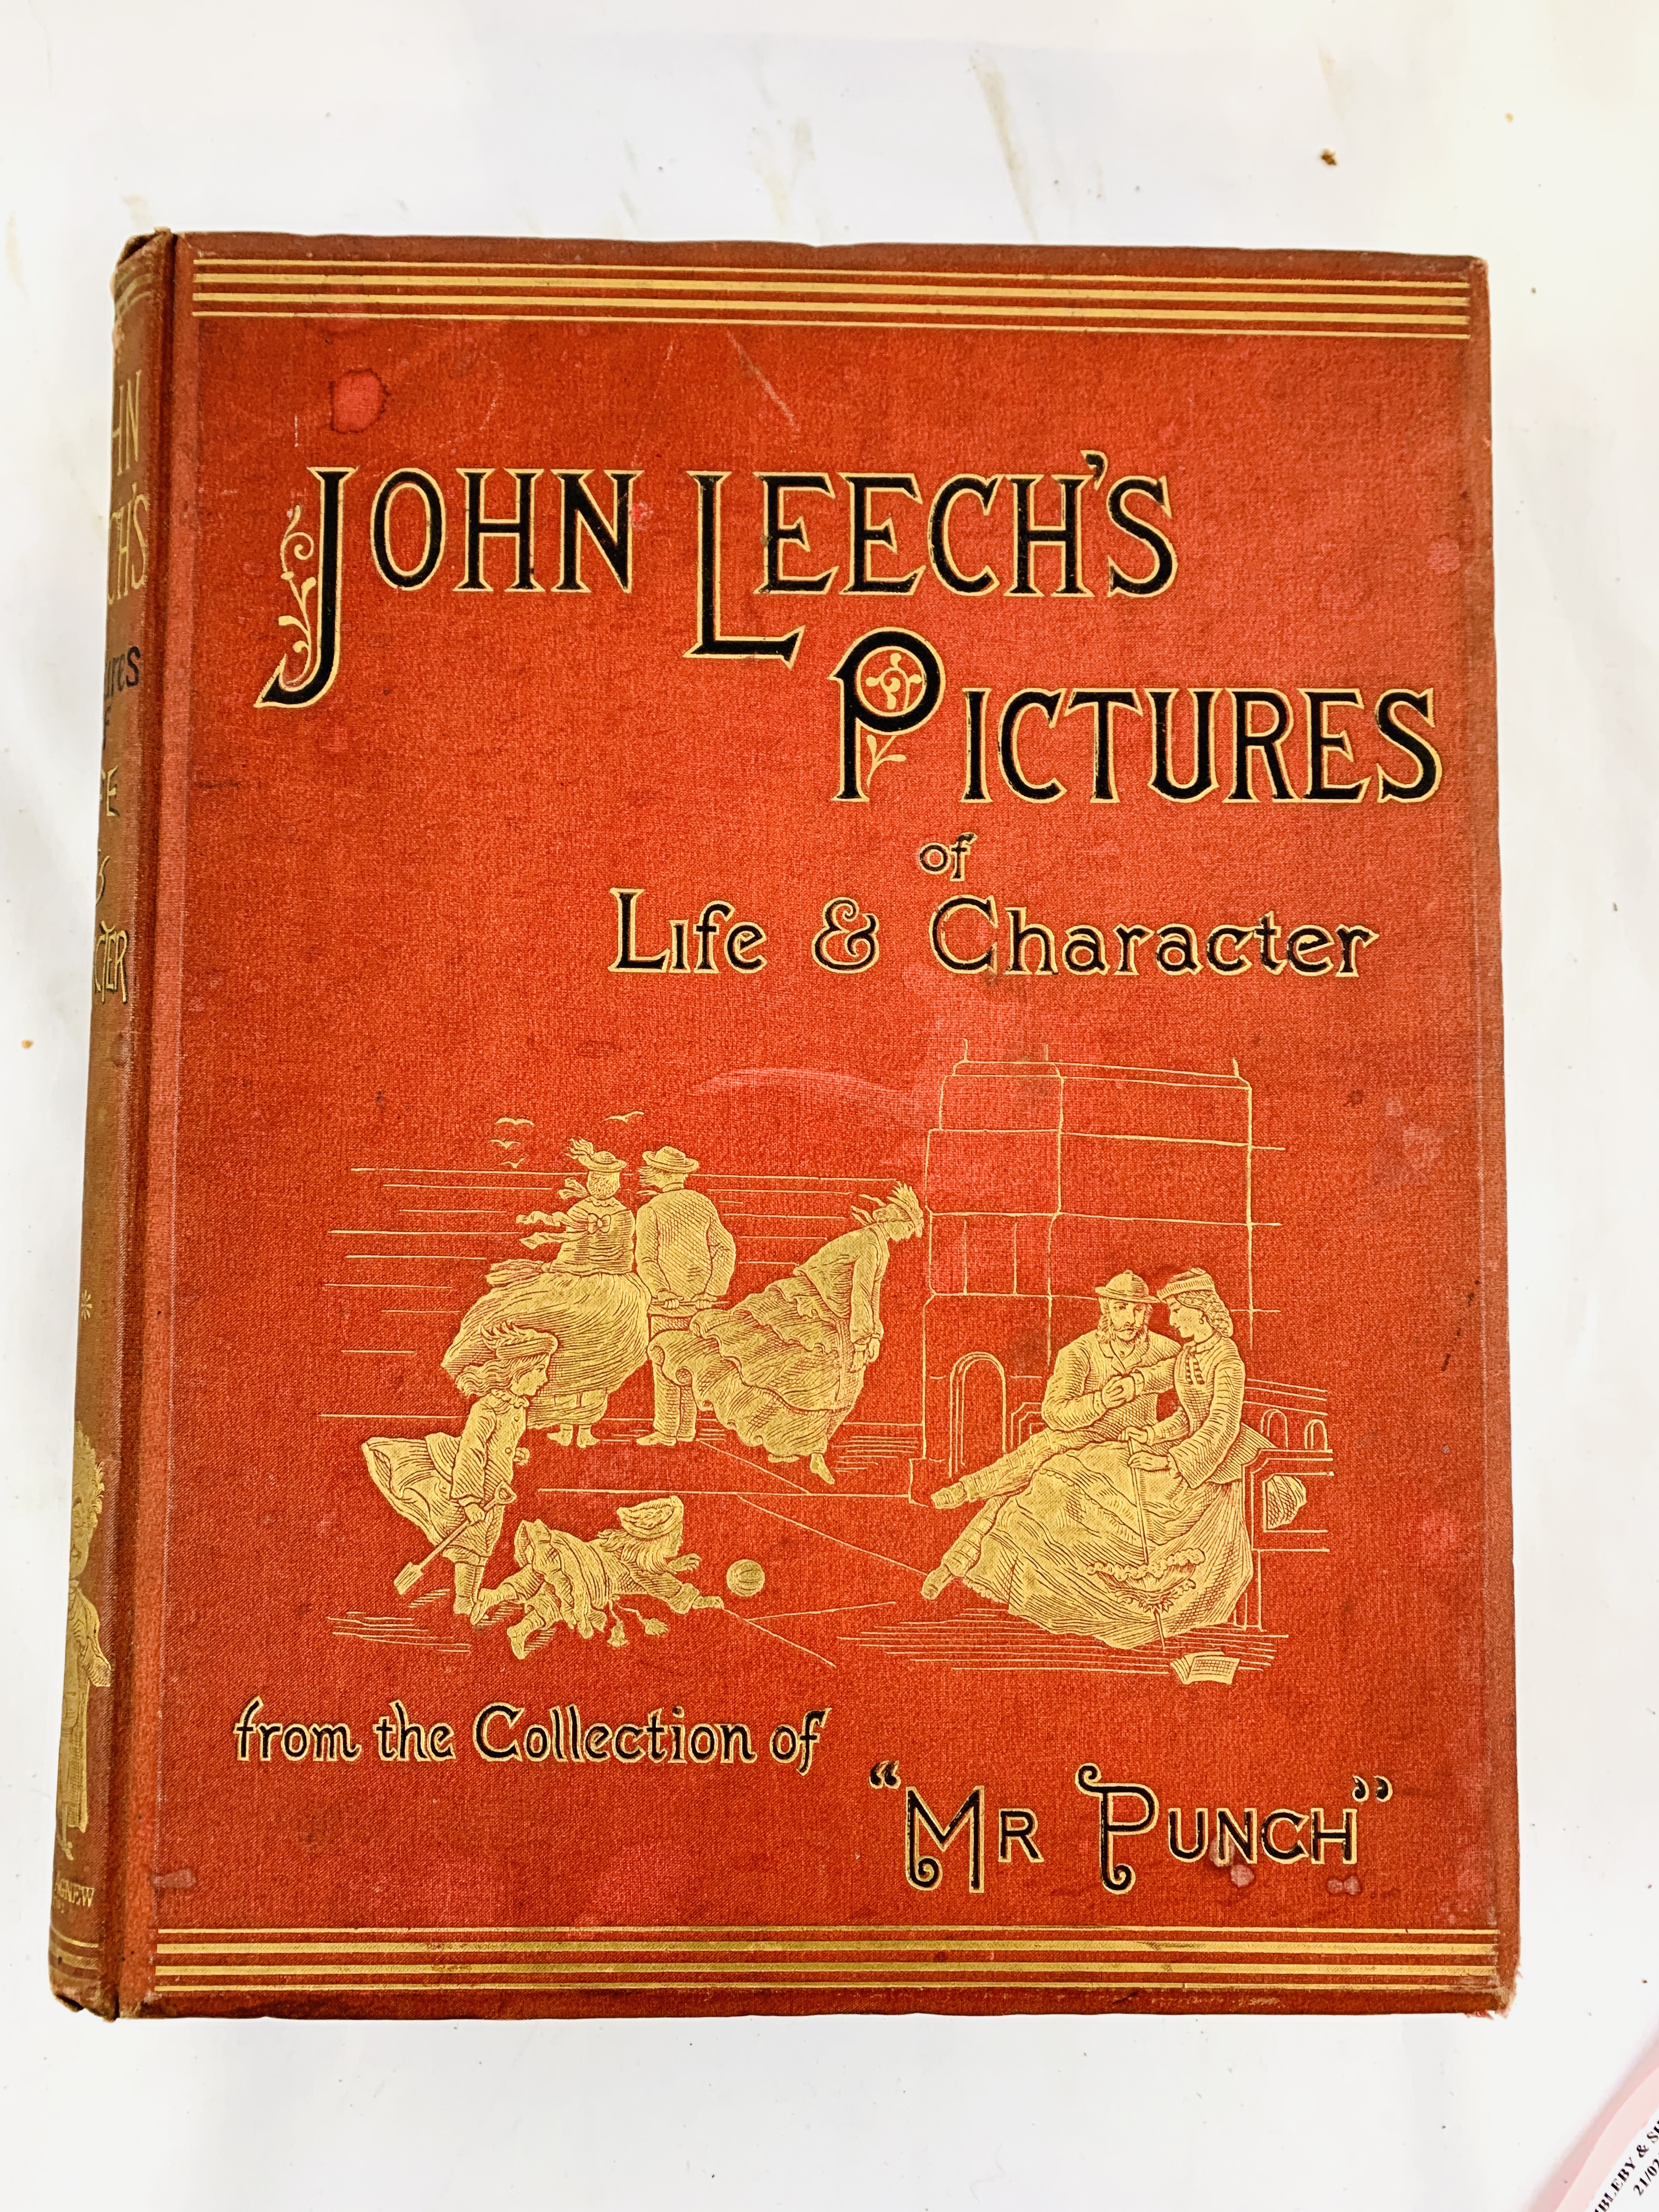 Pictures of Life and Character, 1886-1887, John Leech.